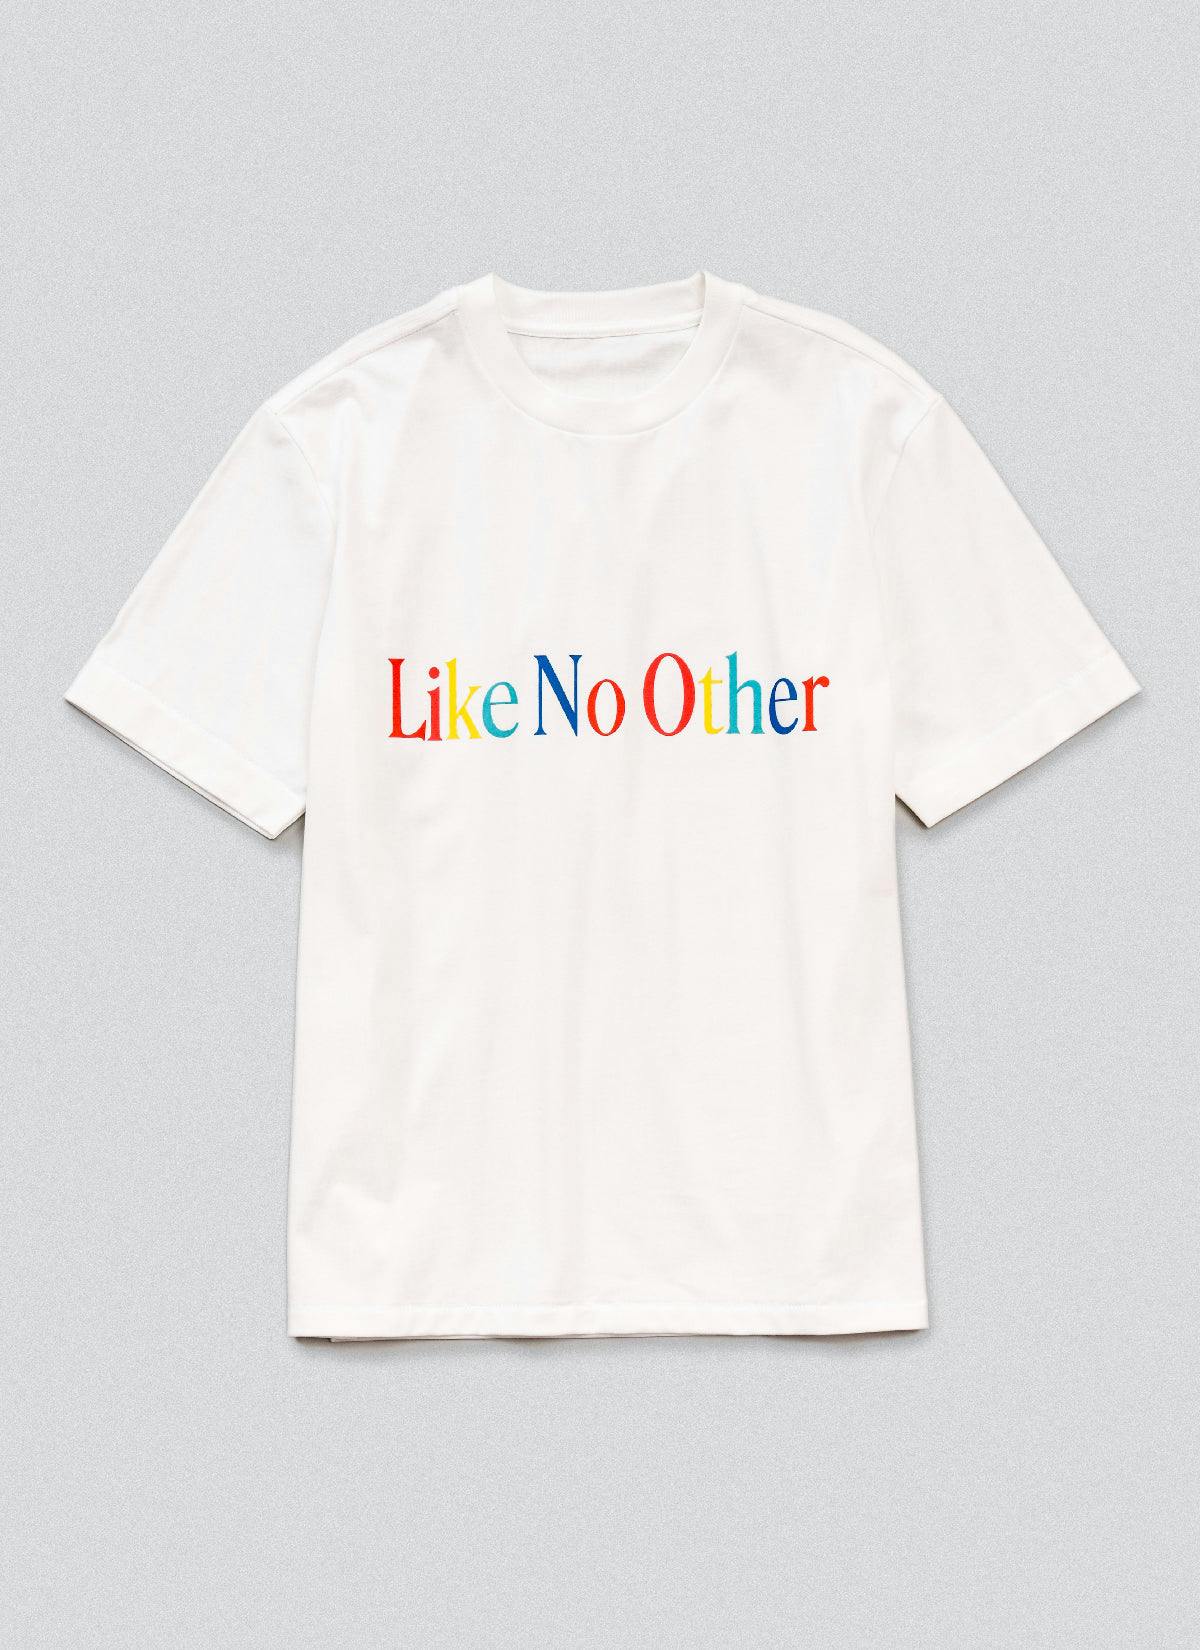 ˝Like No Other˝  T-Shirt White/ Multicolor